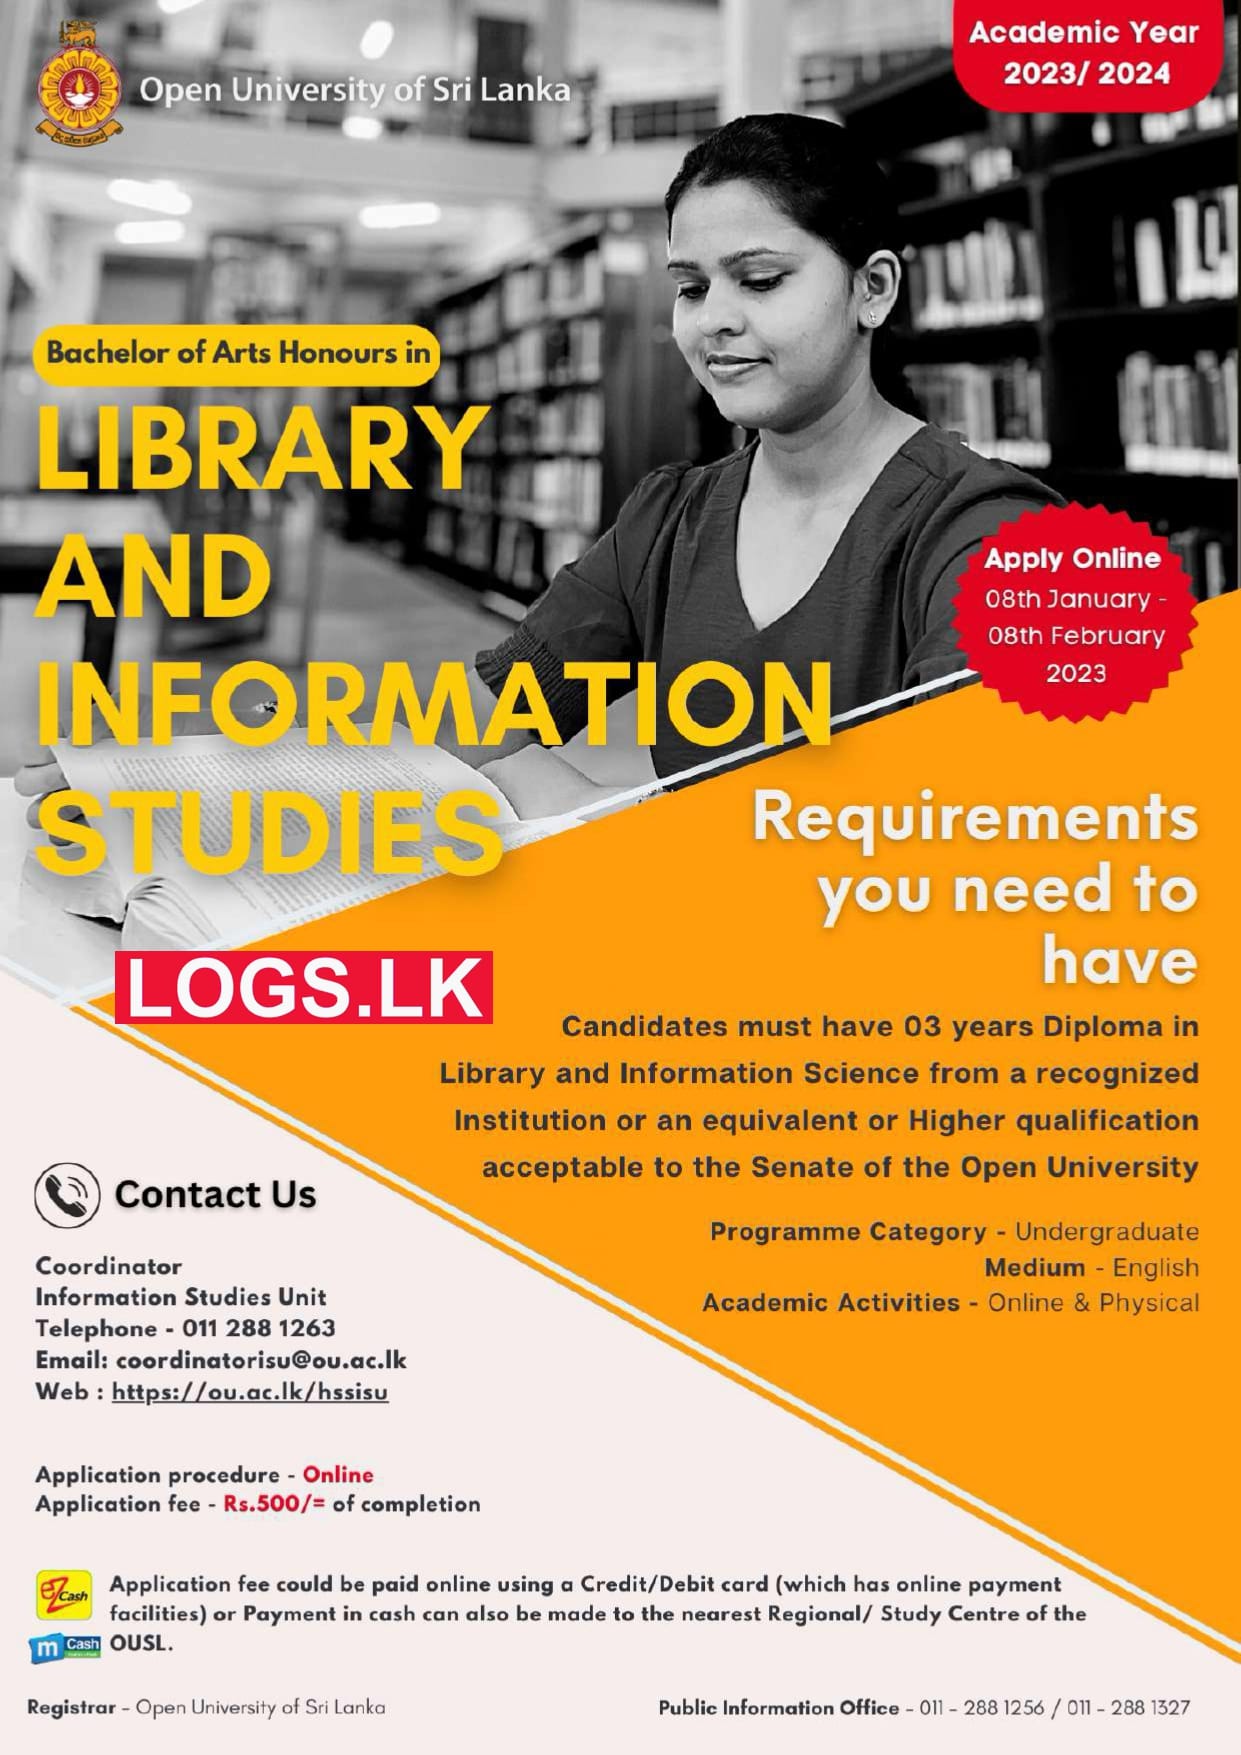 Bachelor of Arts Honors in Library and Information Studies 2023 The Open University of Sri Lanka Degree Application Form, Details Download